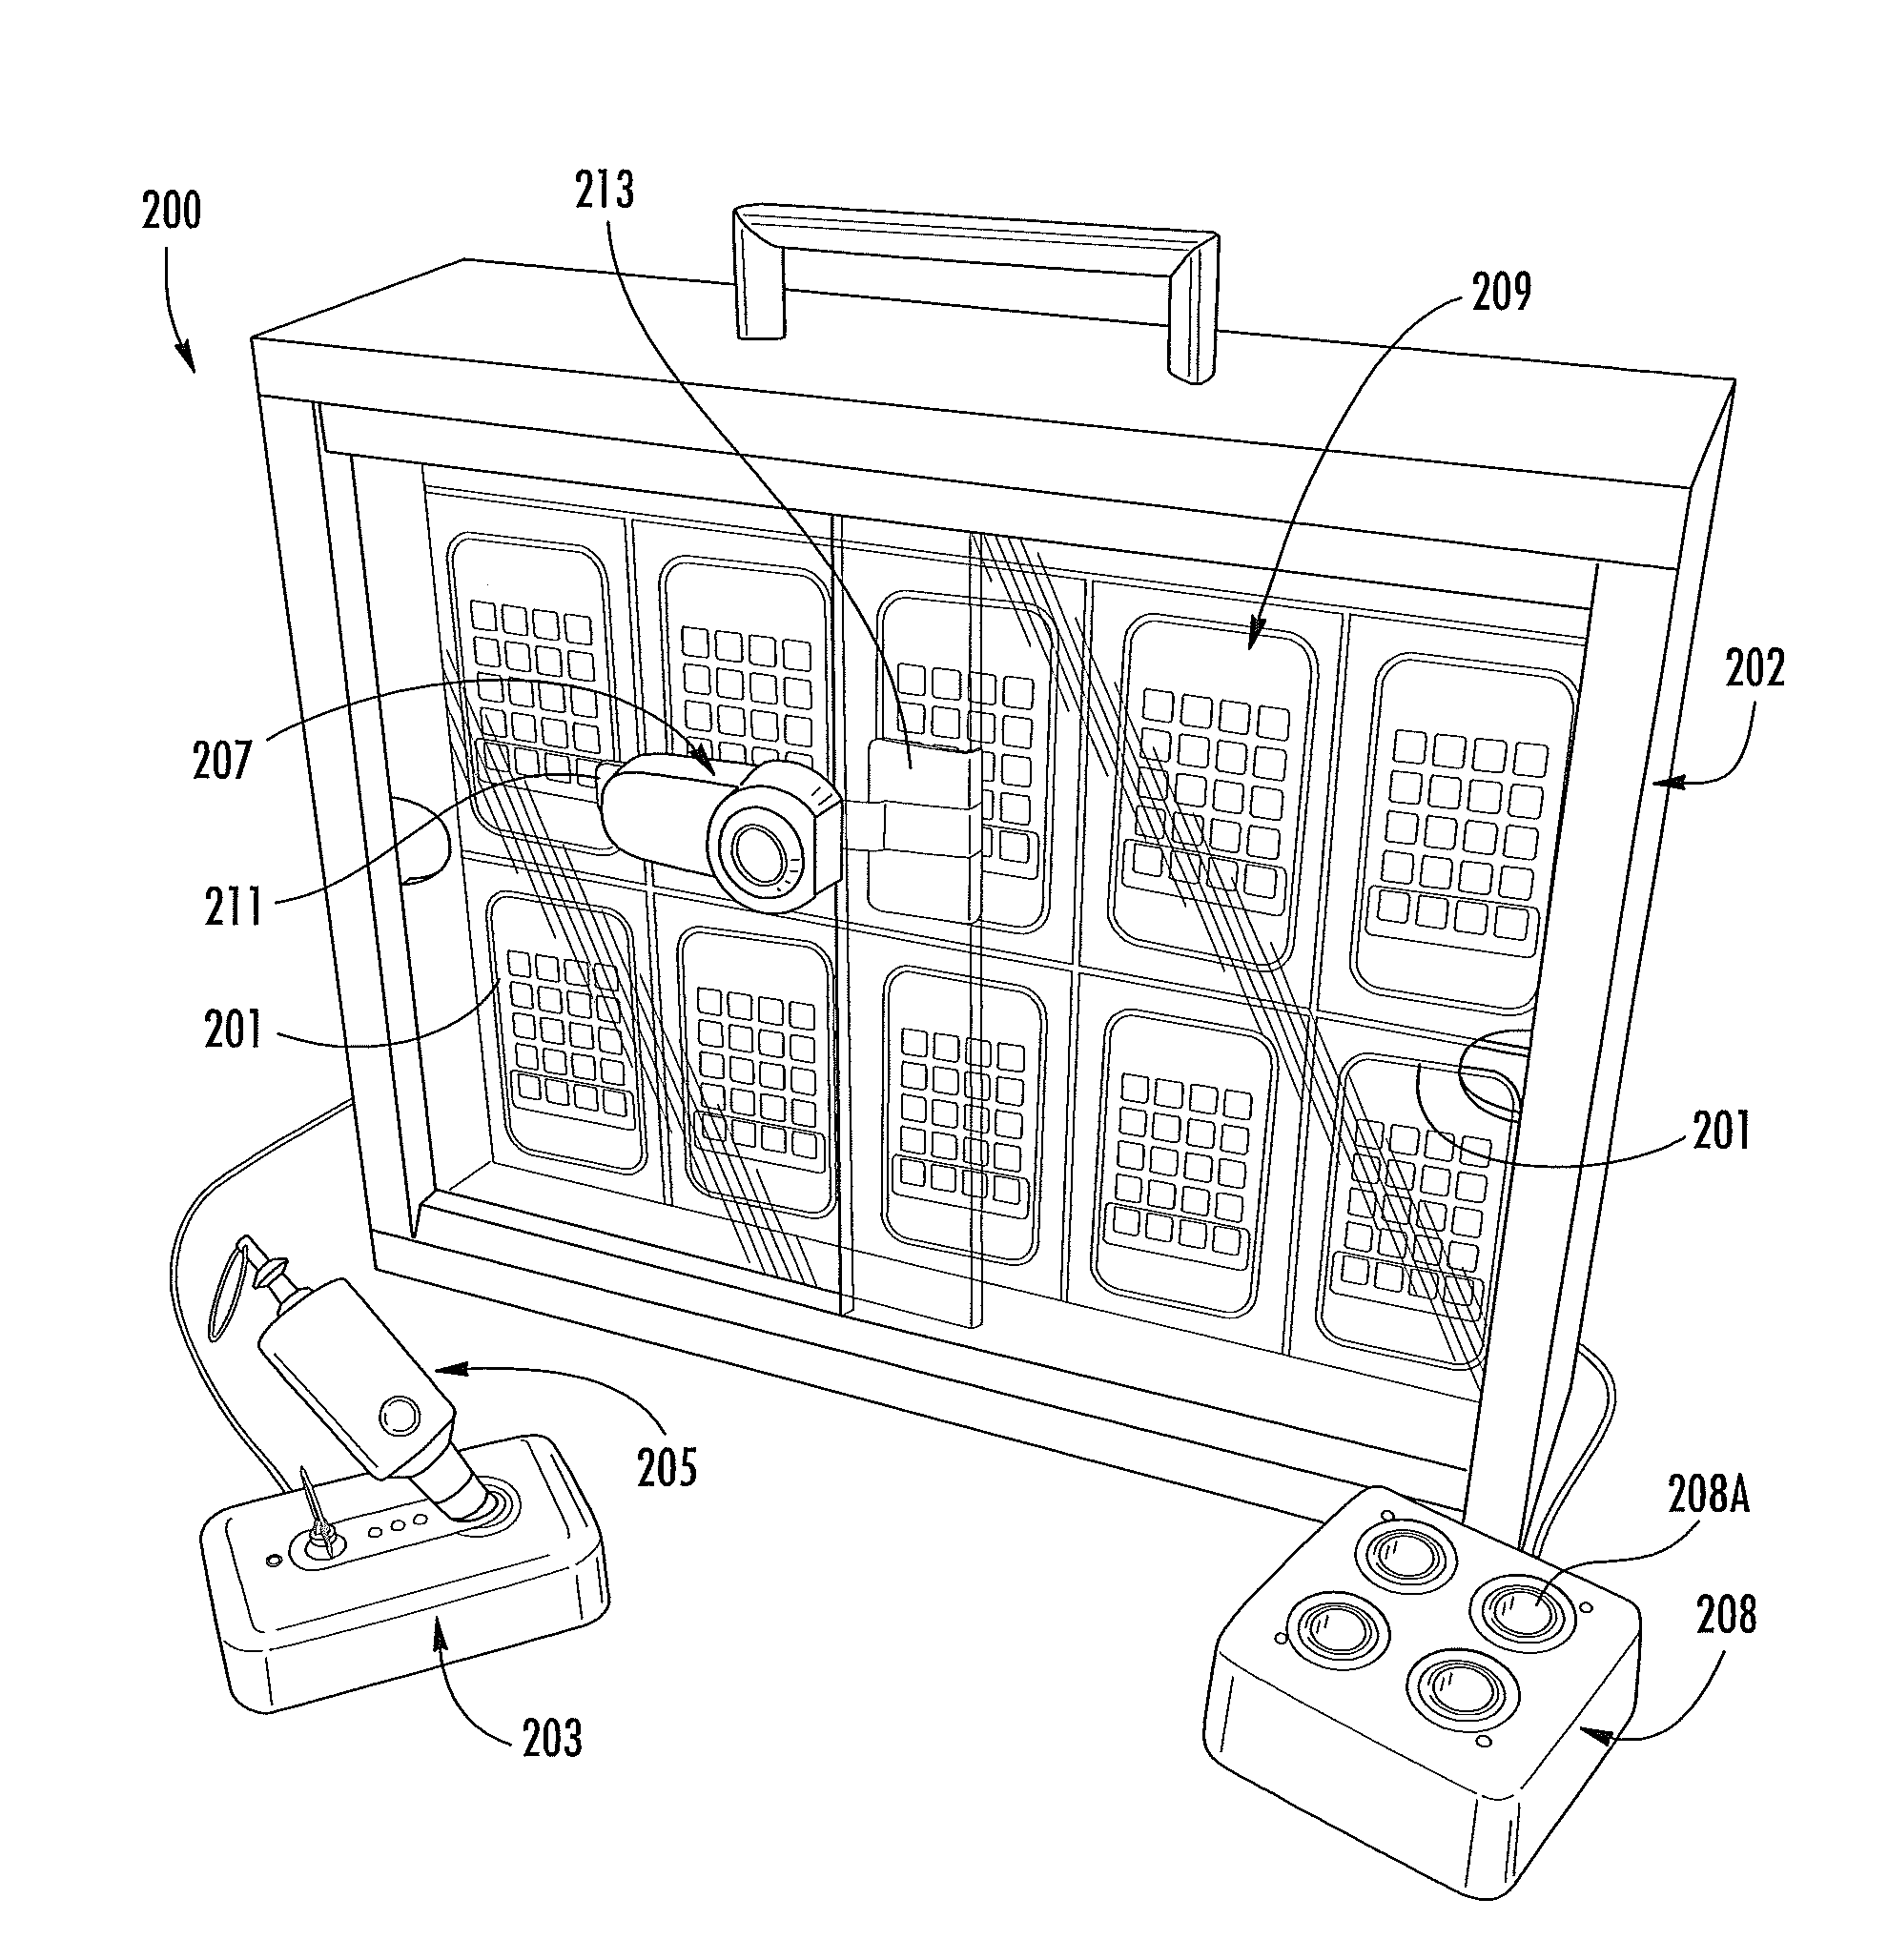 Programmable security system and method for protecting merchandise